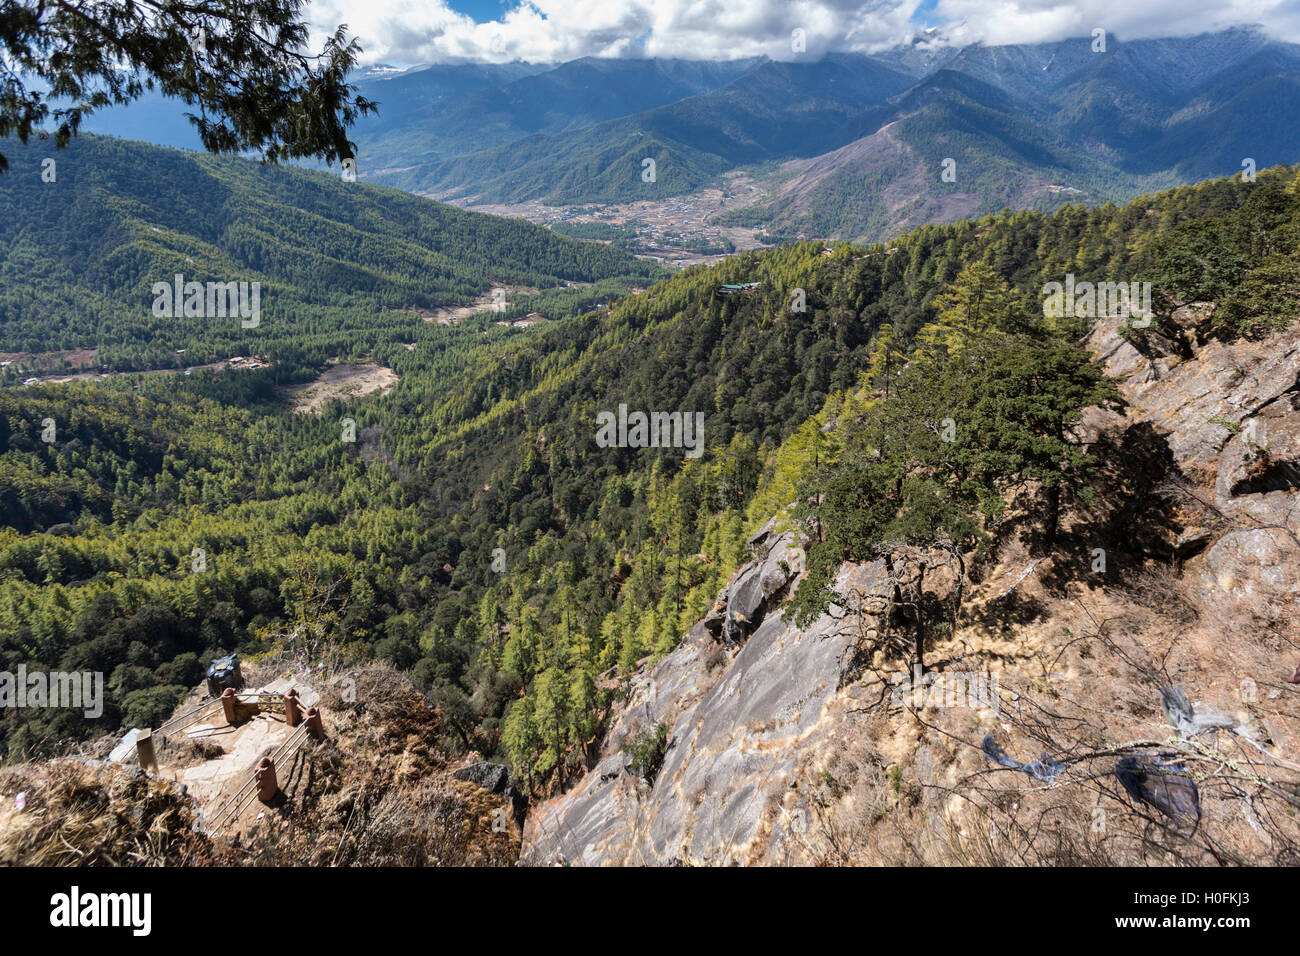 View of Paro Valley from Tiger's Nest Monastery, Bhutan Stock Photo